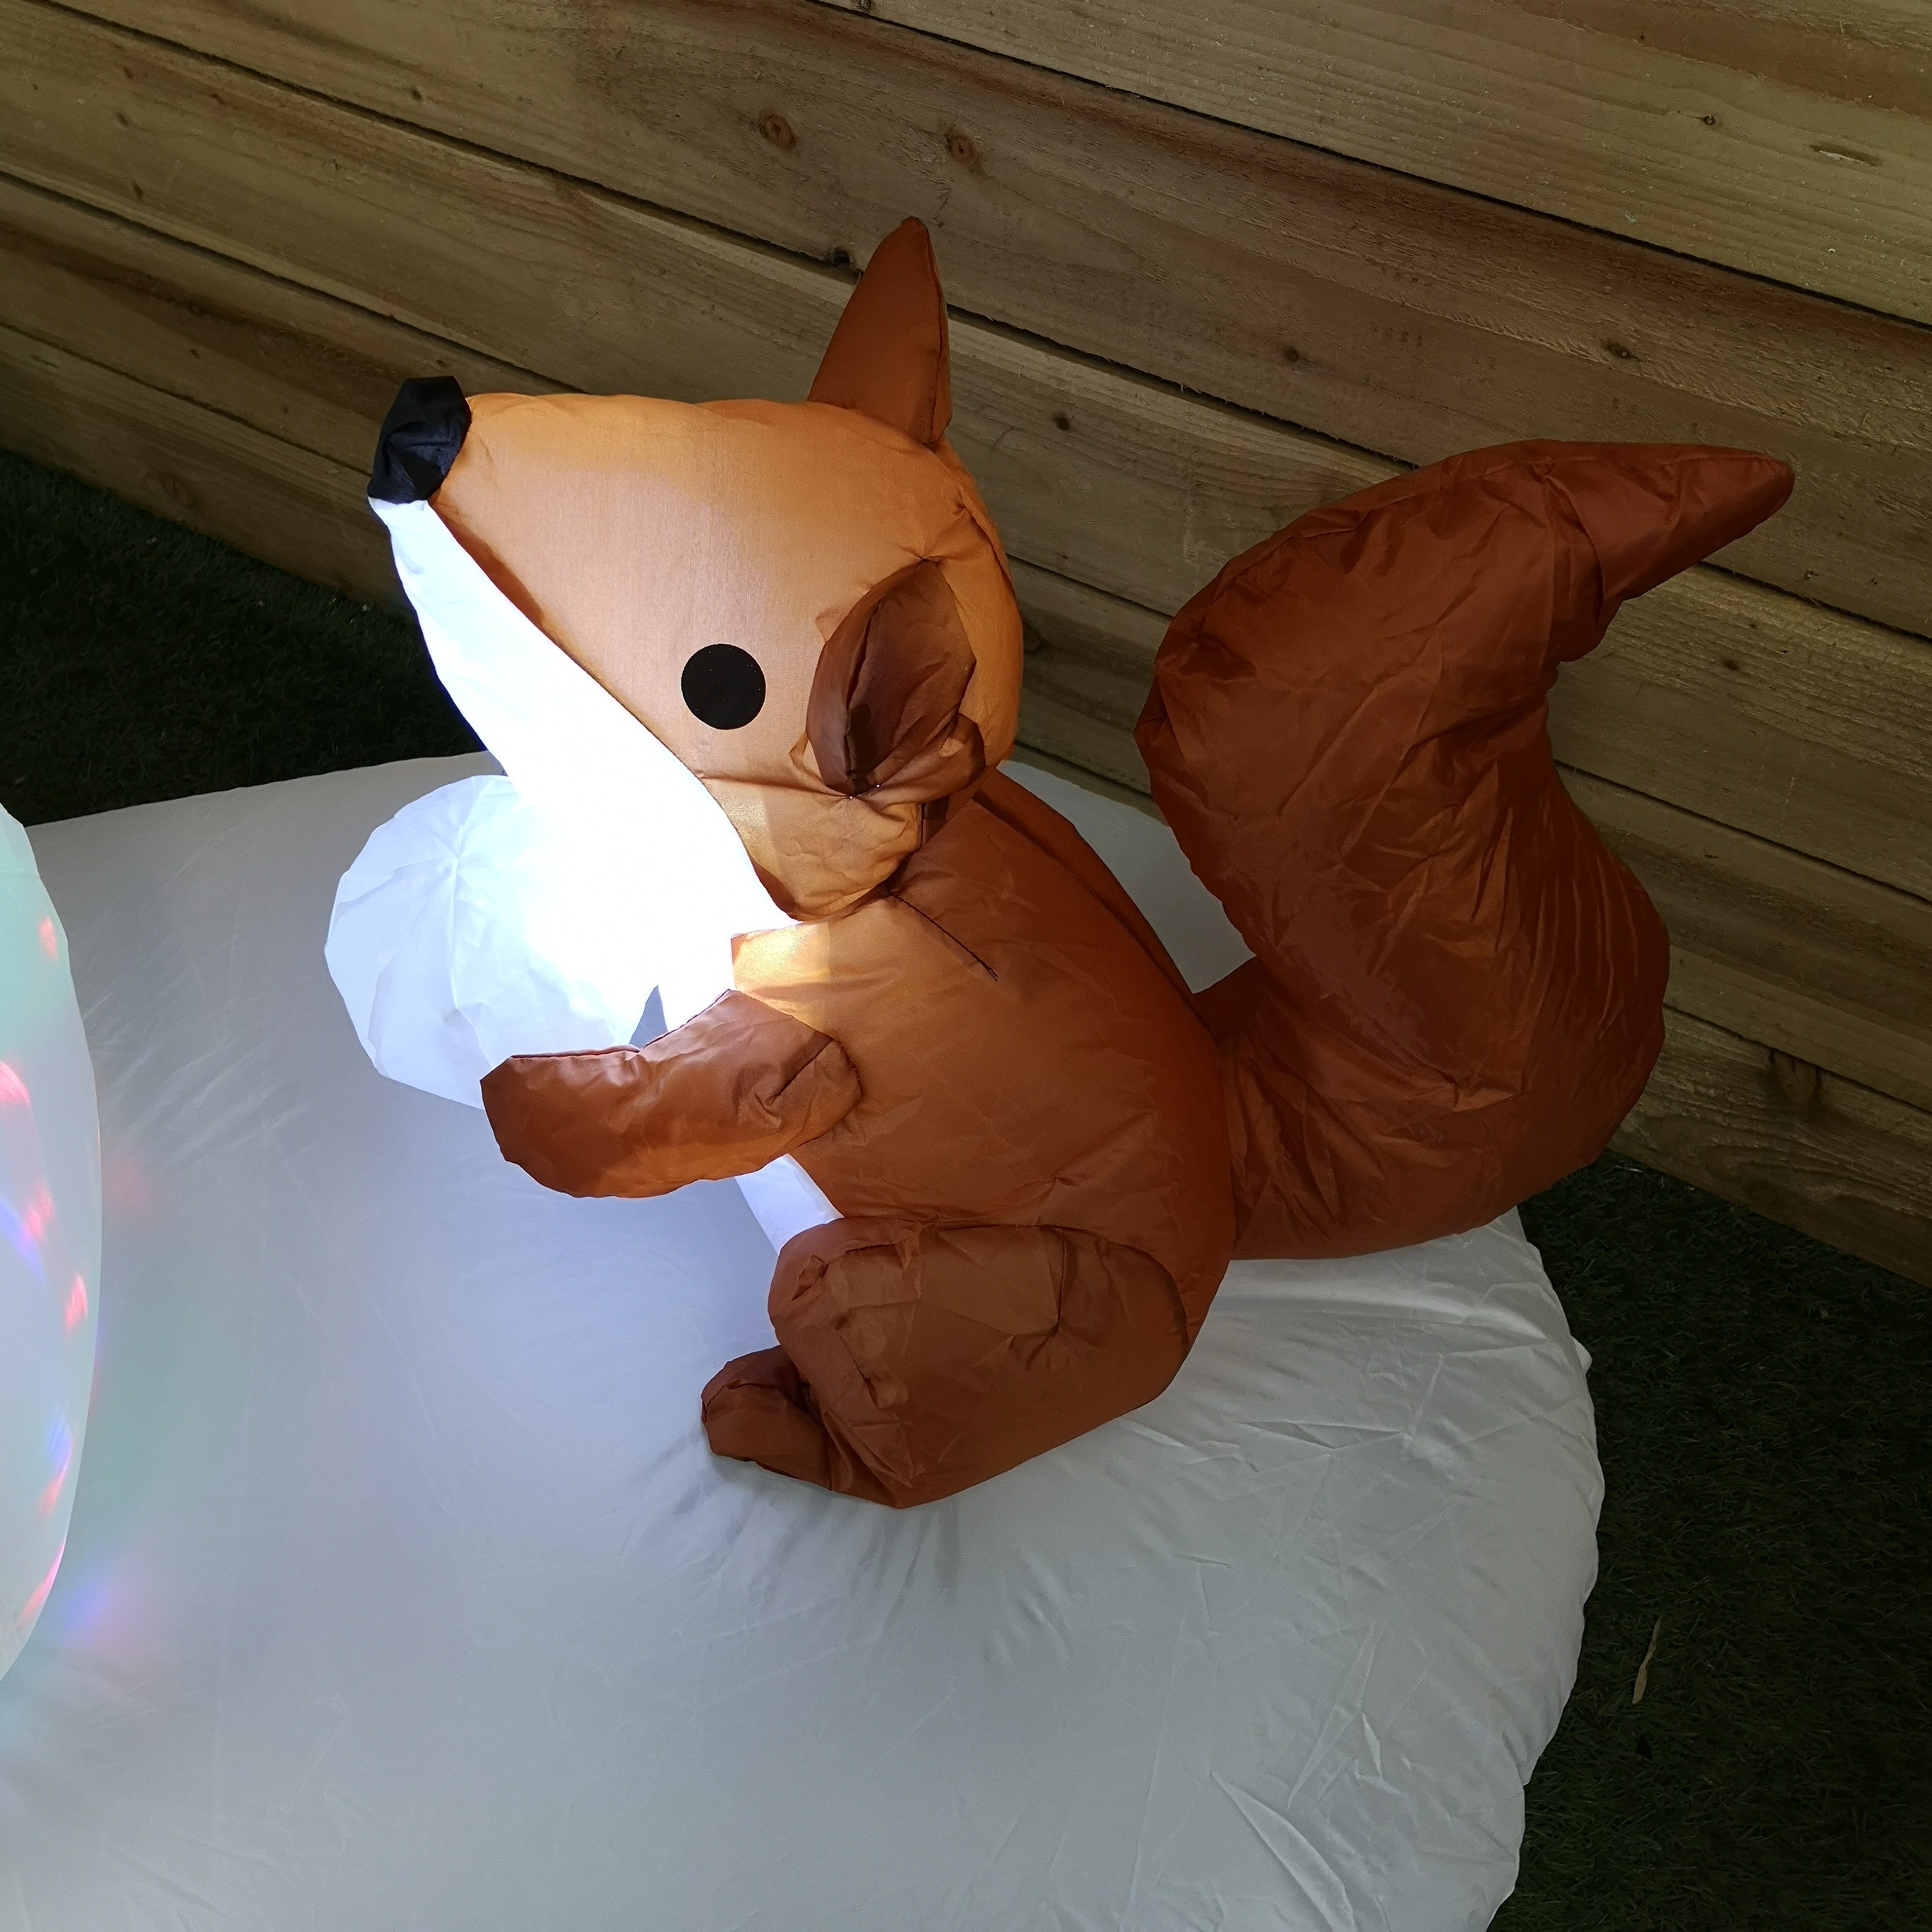 Premier Indoor Outdoor 1.5m Lit Inflatable Multi Coloured Flashing Snowman with Fox And Squirrel